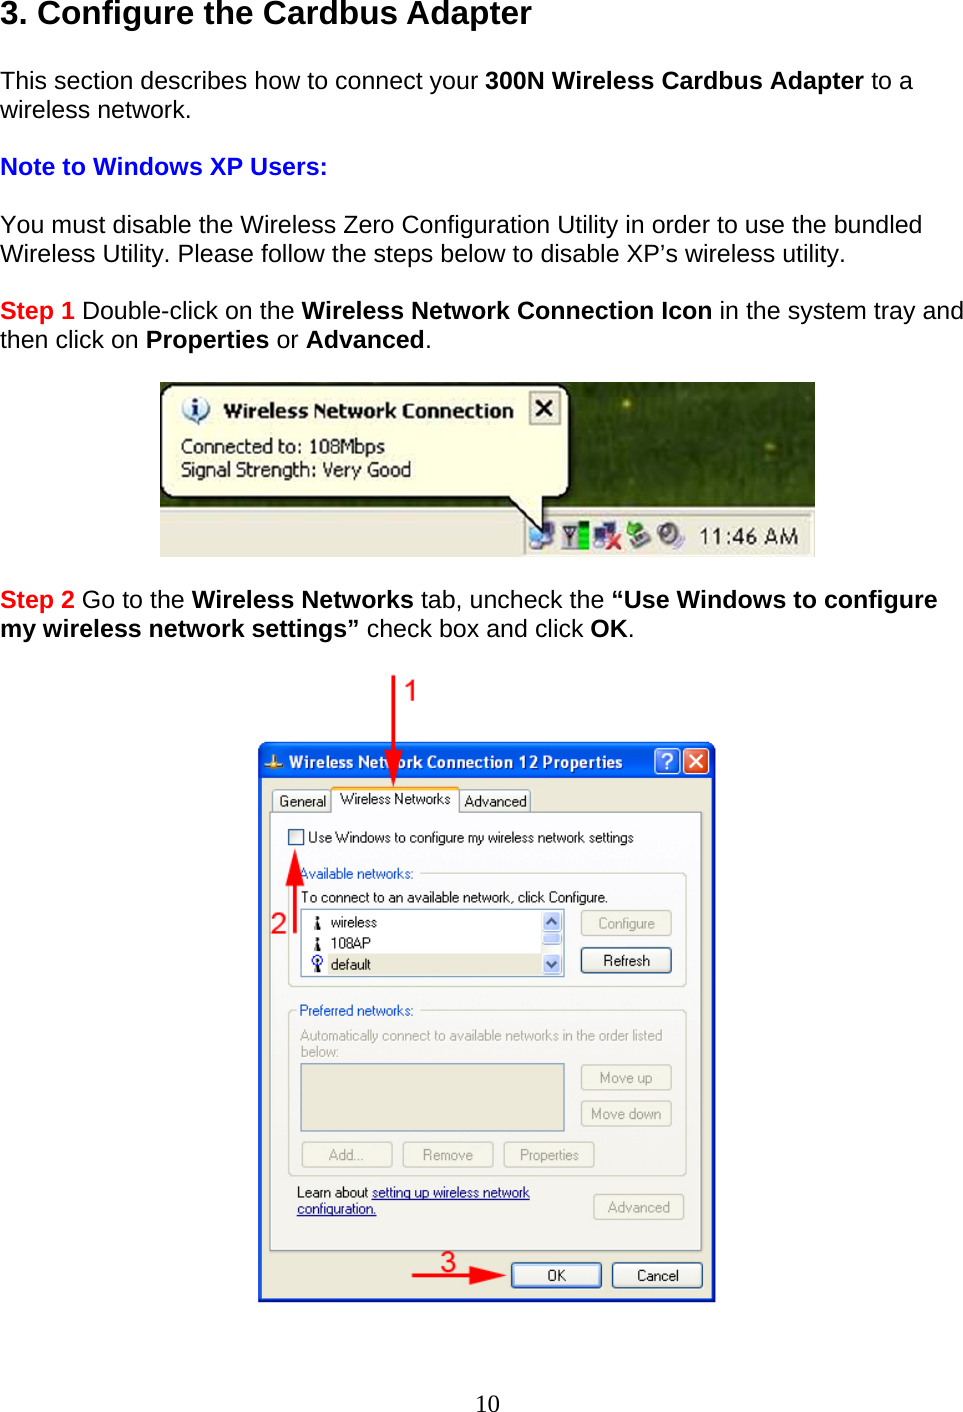 10 3. Configure the Cardbus Adapter  This section describes how to connect your 300N Wireless Cardbus Adapter to a wireless network.  Note to Windows XP Users:  You must disable the Wireless Zero Configuration Utility in order to use the bundled Wireless Utility. Please follow the steps below to disable XP’s wireless utility.  Step 1 Double-click on the Wireless Network Connection Icon in the system tray and then click on Properties or Advanced.    Step 2 Go to the Wireless Networks tab, uncheck the “Use Windows to configure my wireless network settings” check box and click OK.    